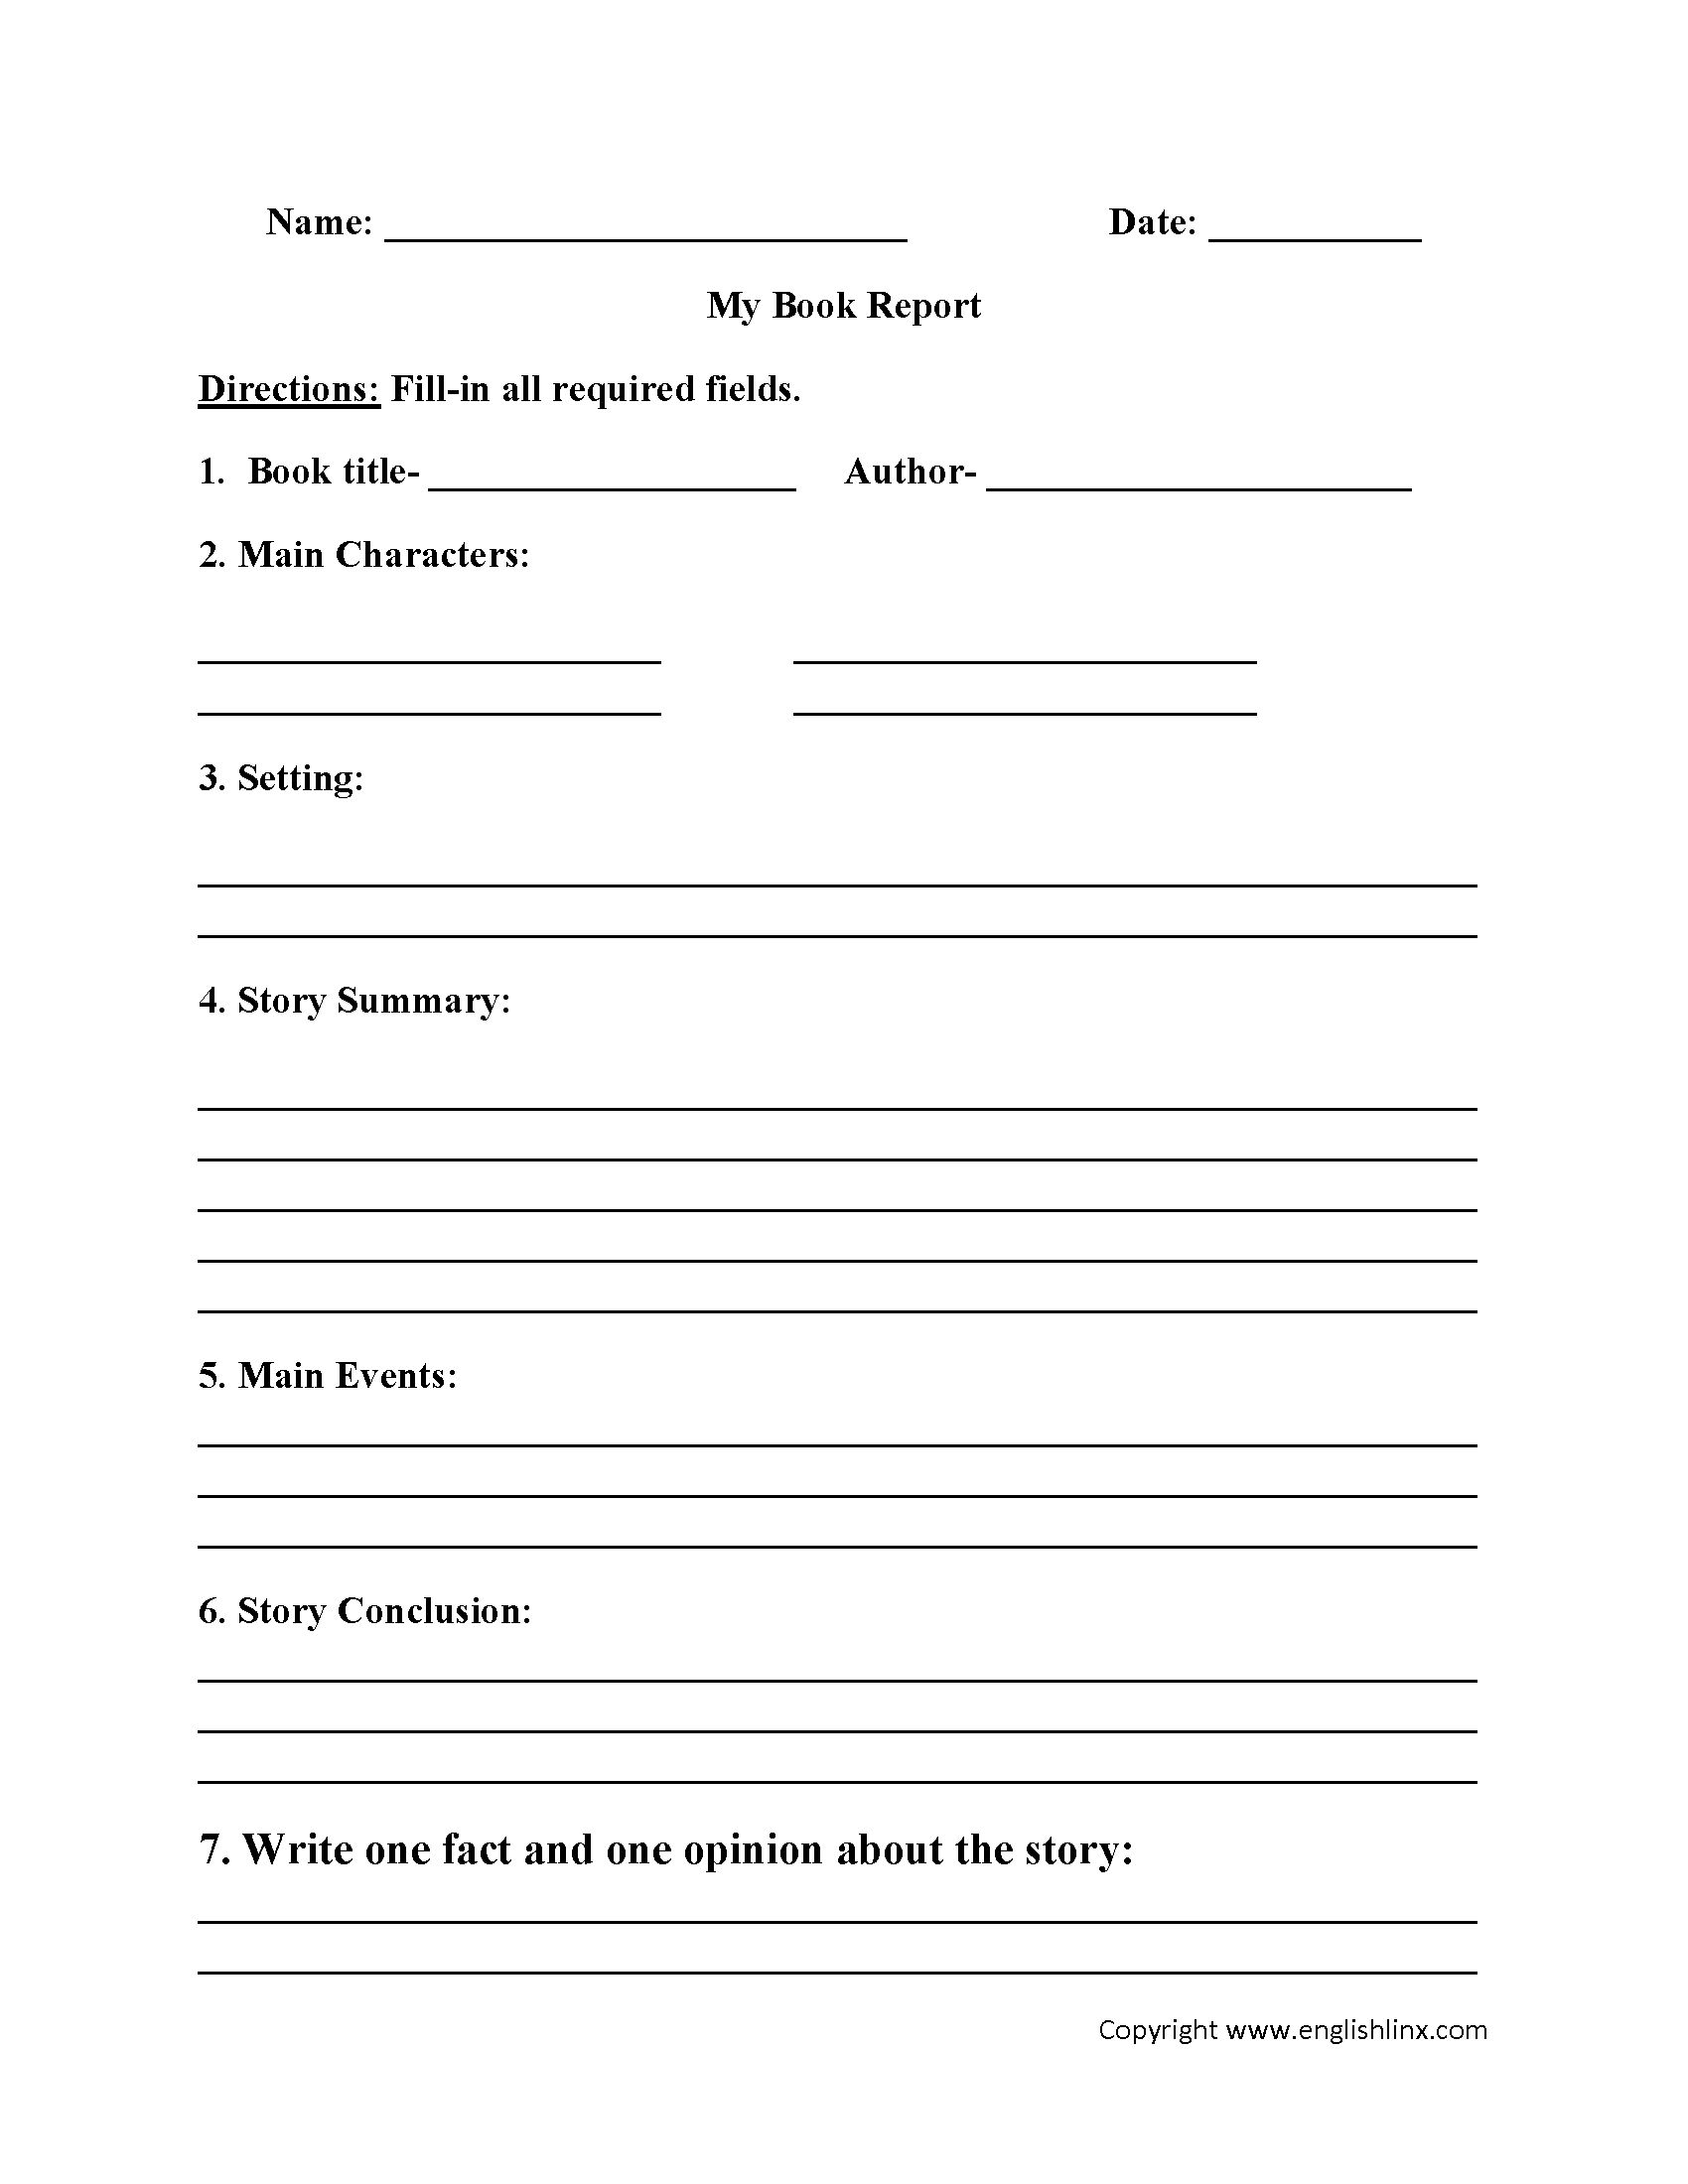 Englishlinx | Book Report Worksheets - Book Report Template Free Printable